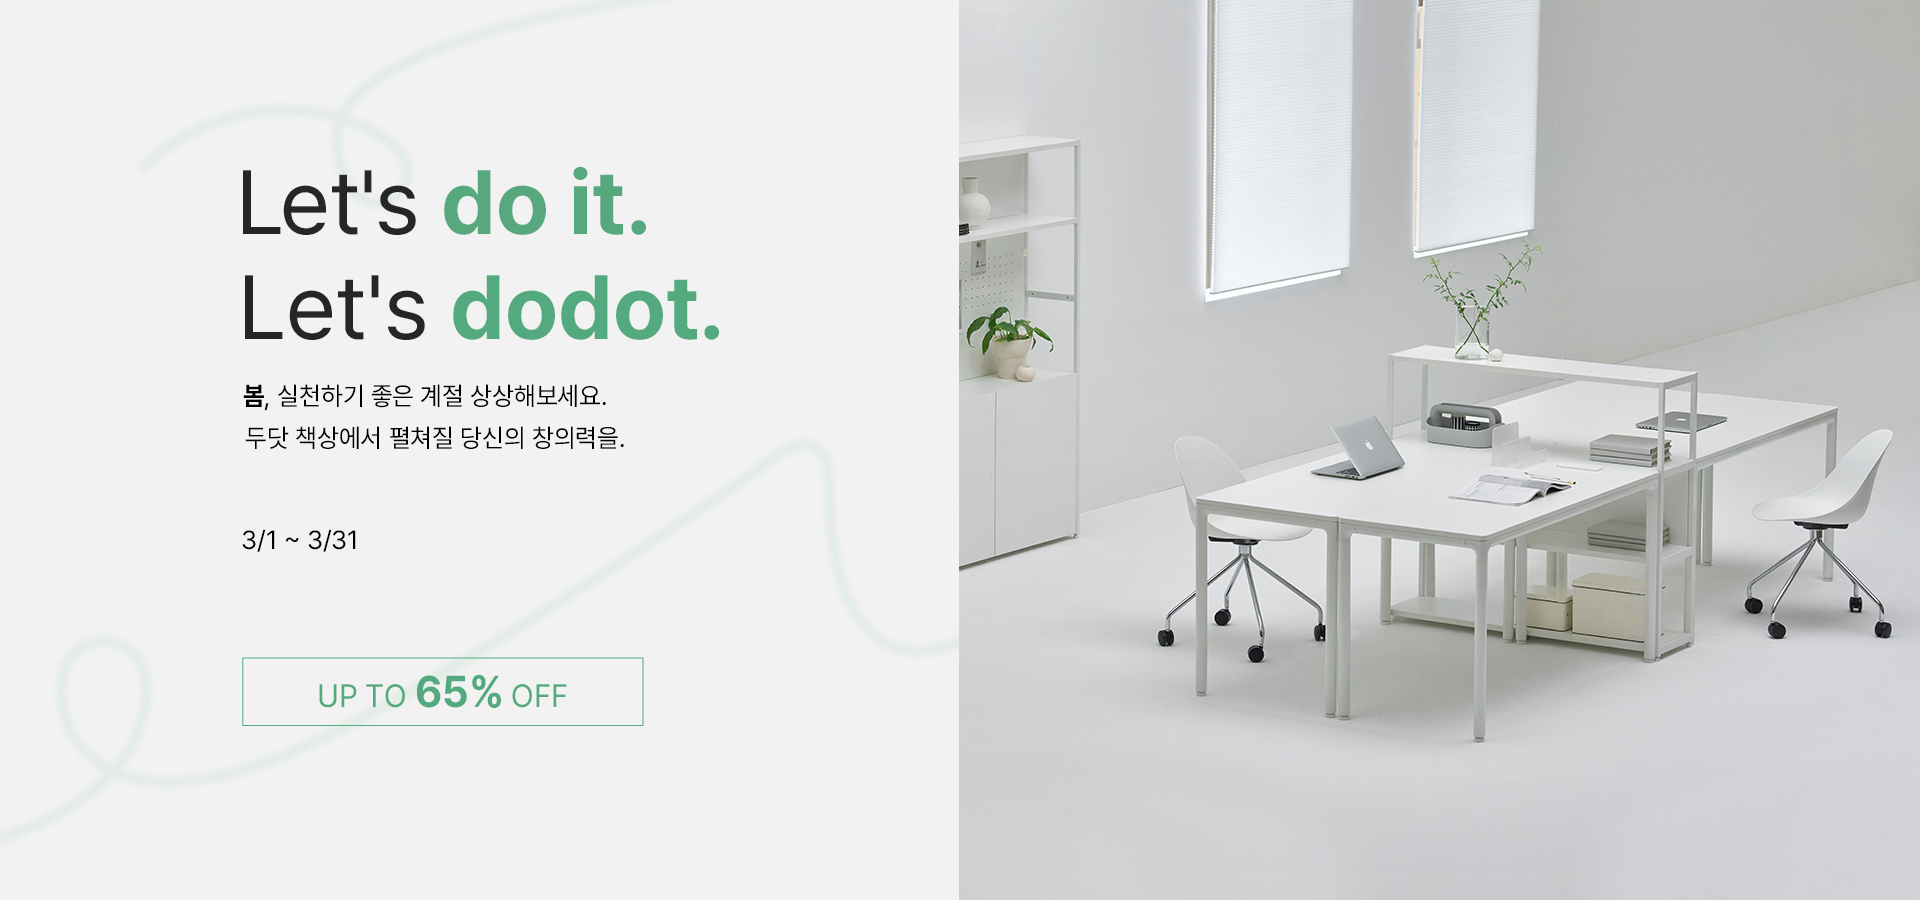 let's do it. let's dodot. Up to 65% off